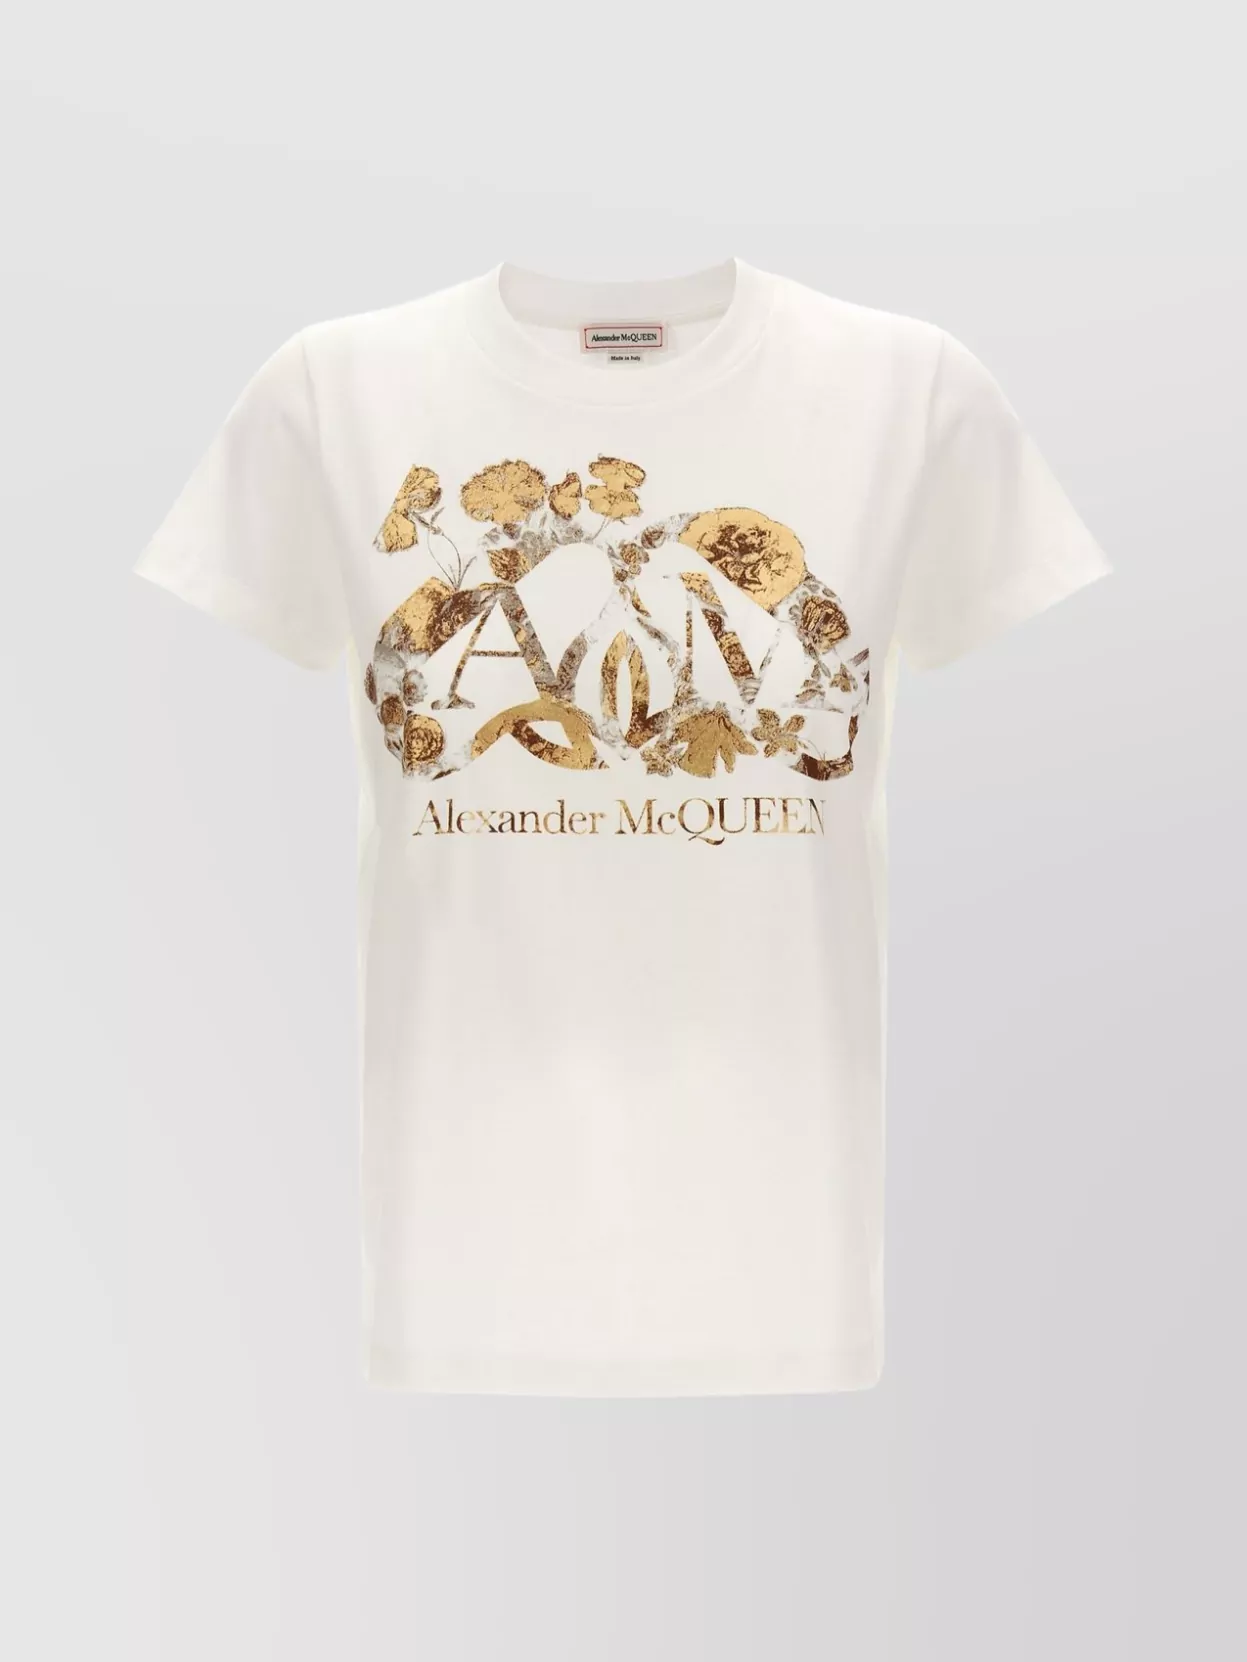 Alexander Mcqueen Floral Graphic T-shirt Gold Accents